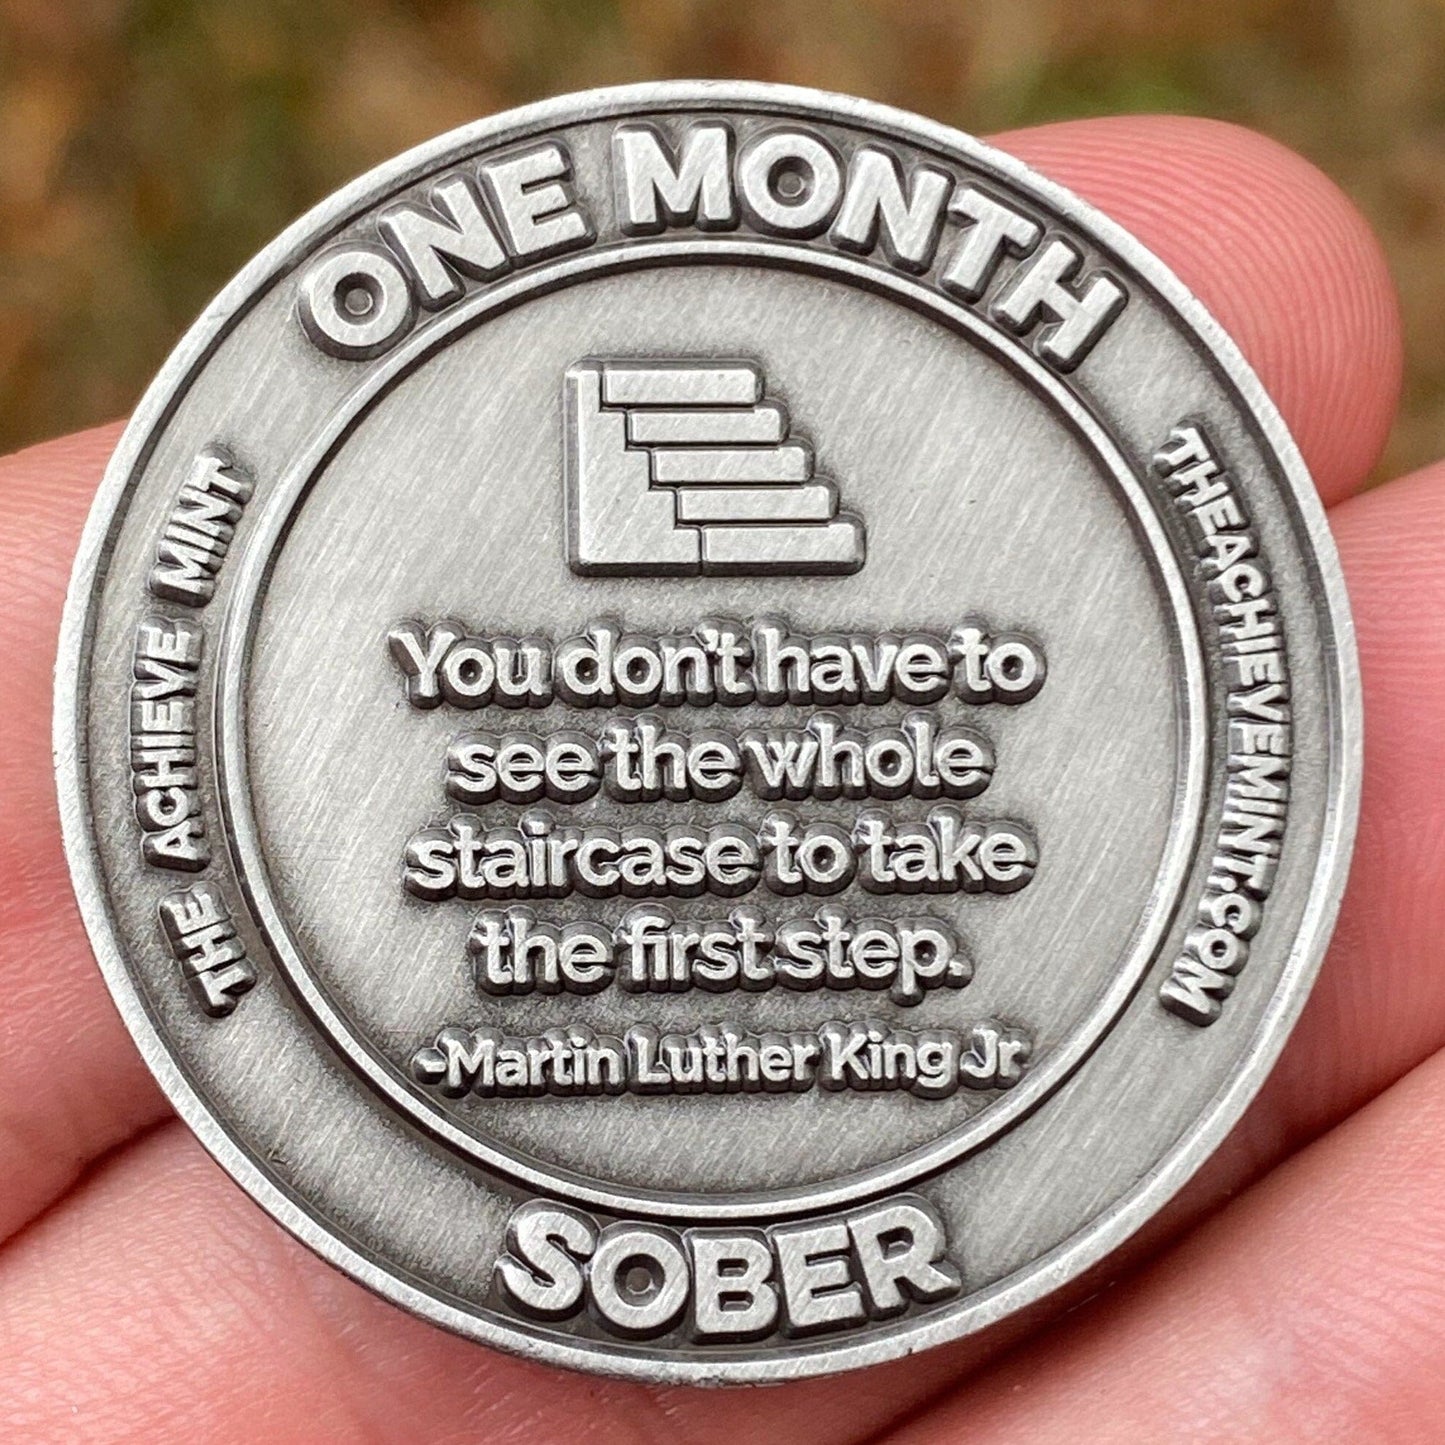 One Month Sober sobriety coin - The Achieve Mint